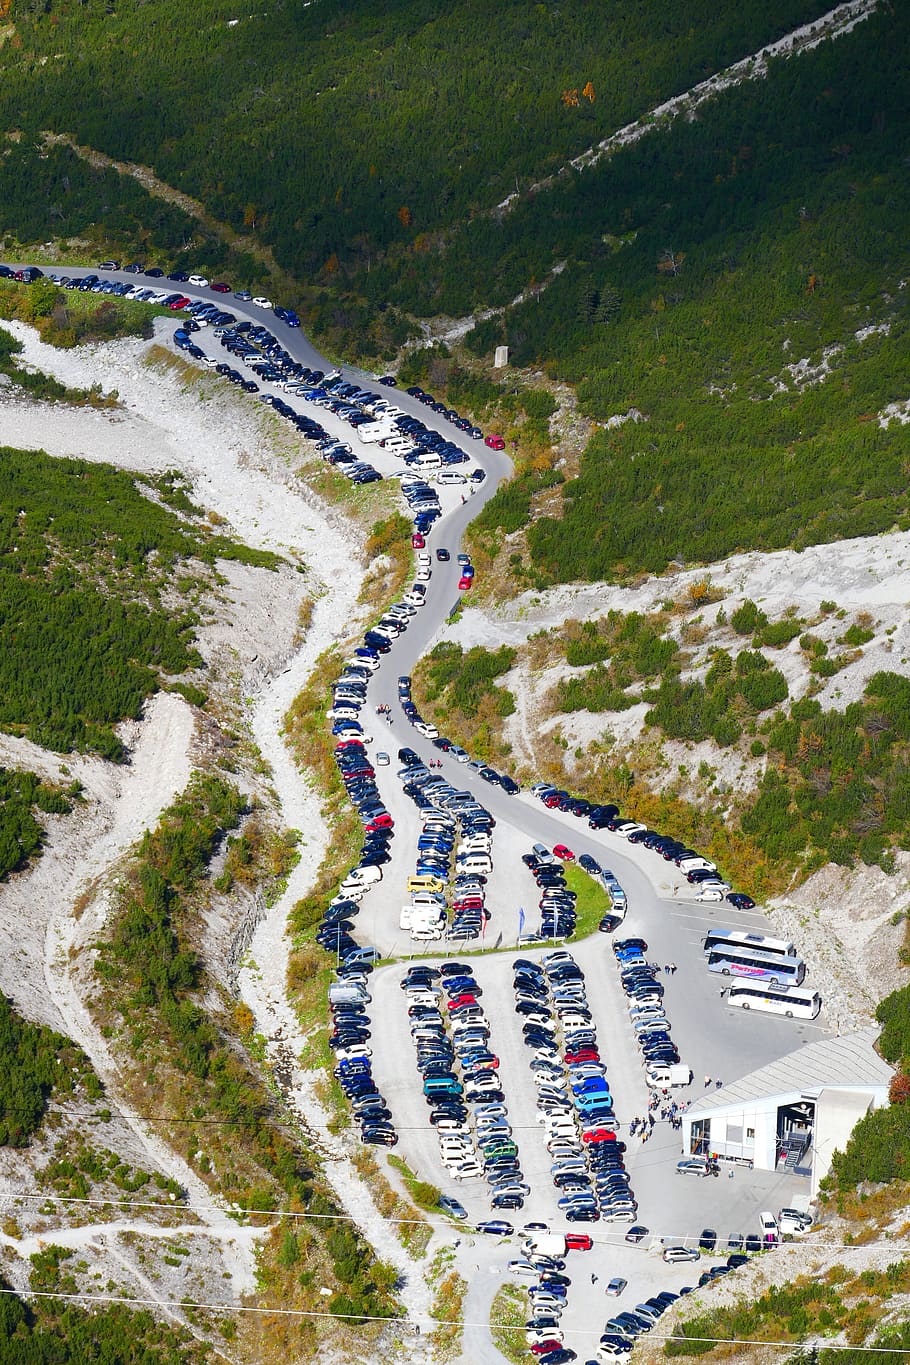 park, parking, crowded, full, alternate space, vehicles, pkw, alpine, high angle view, architecture